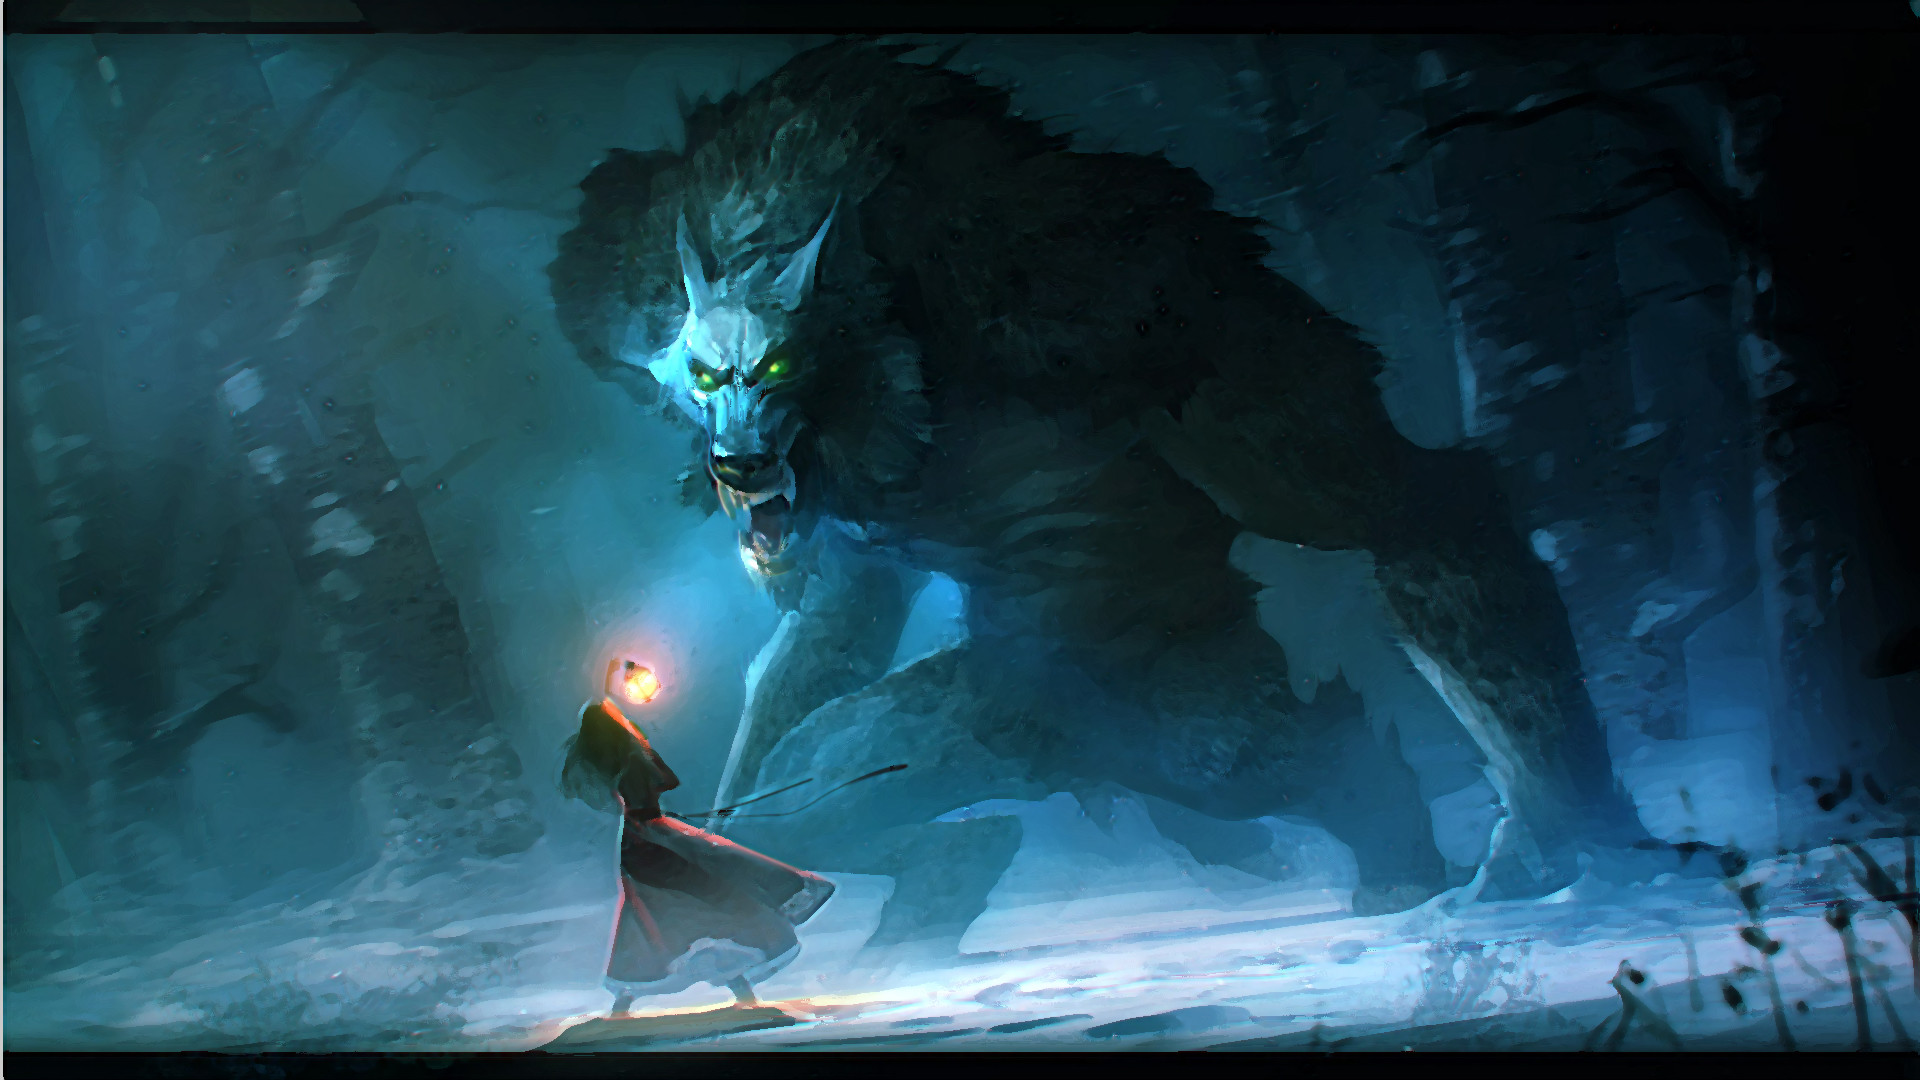 Werewolf Image And Wallpaper